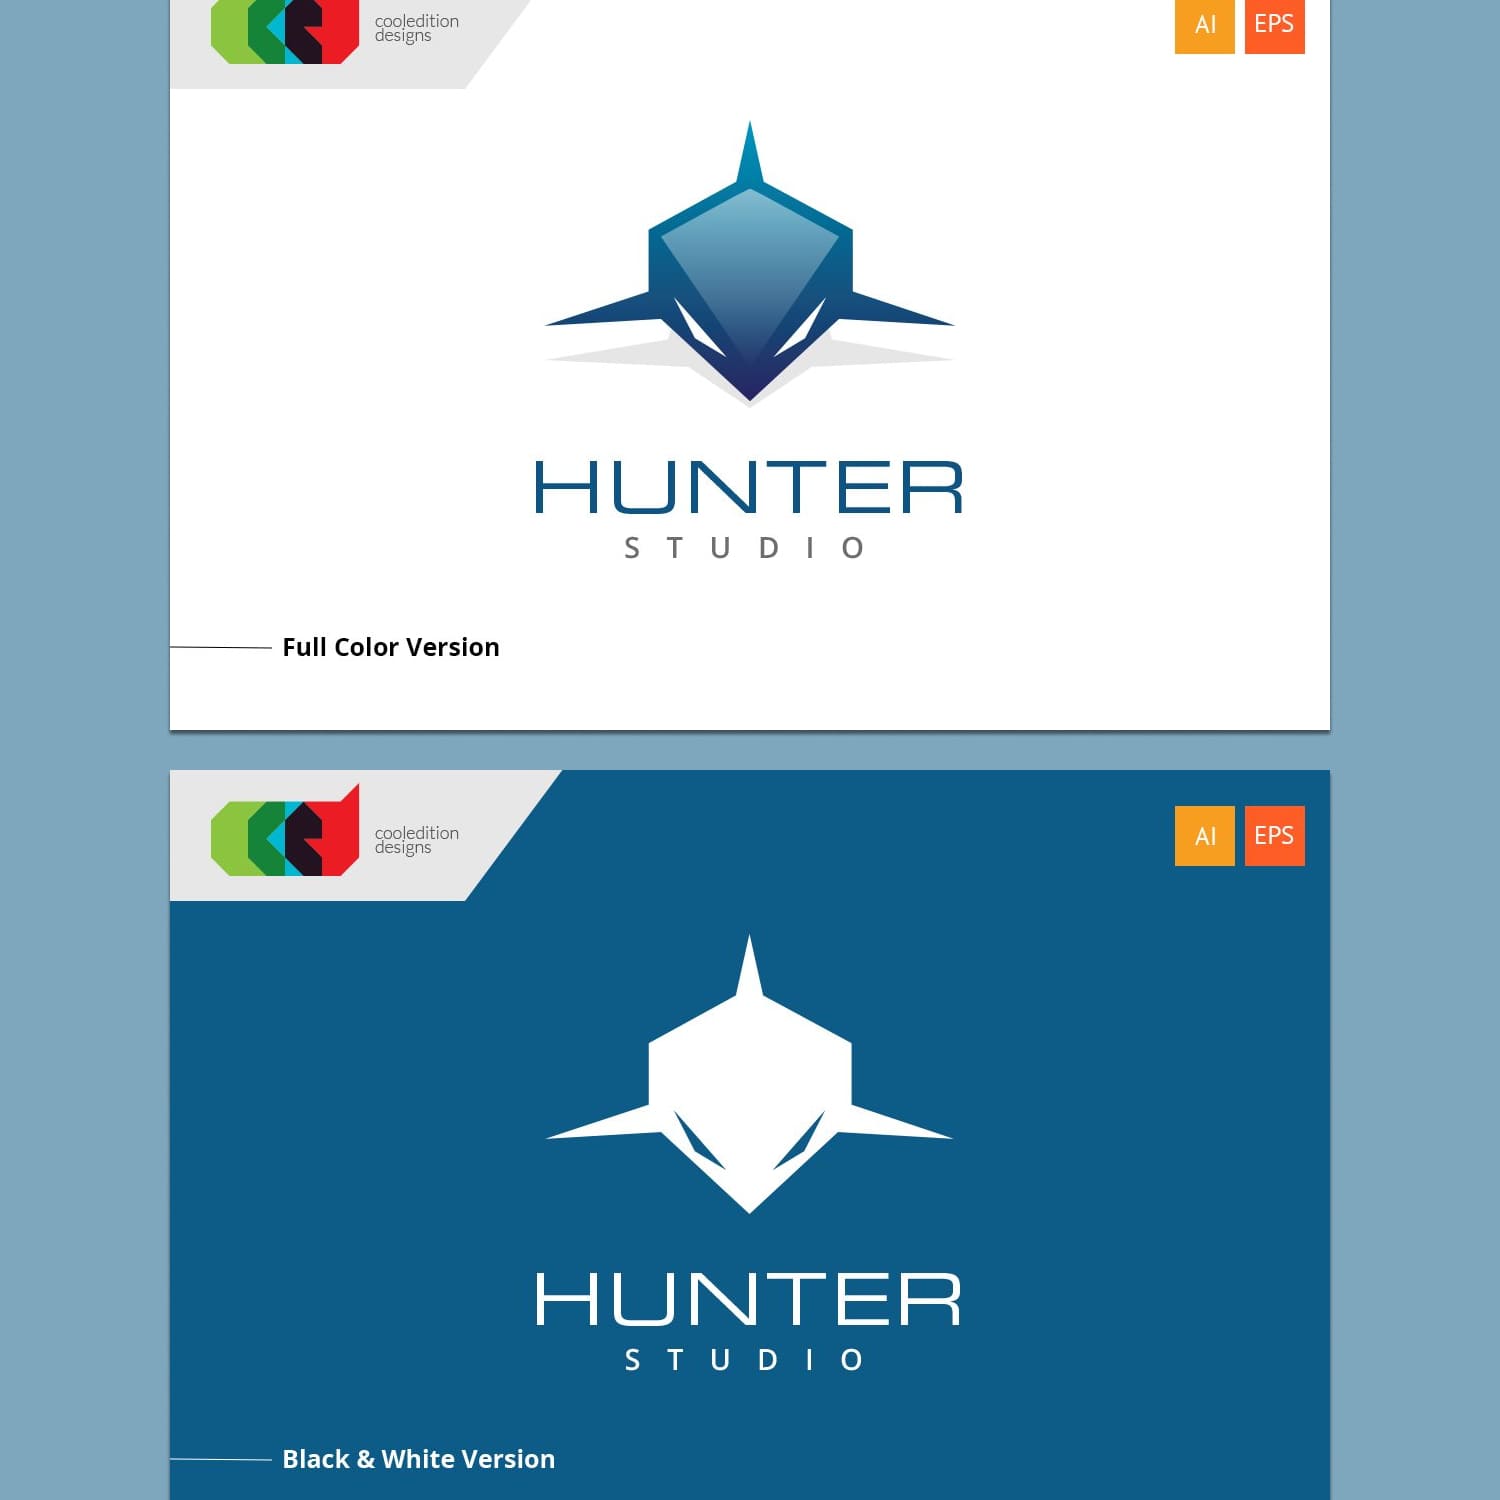 Hunter - Logo Template created by Cooledition.